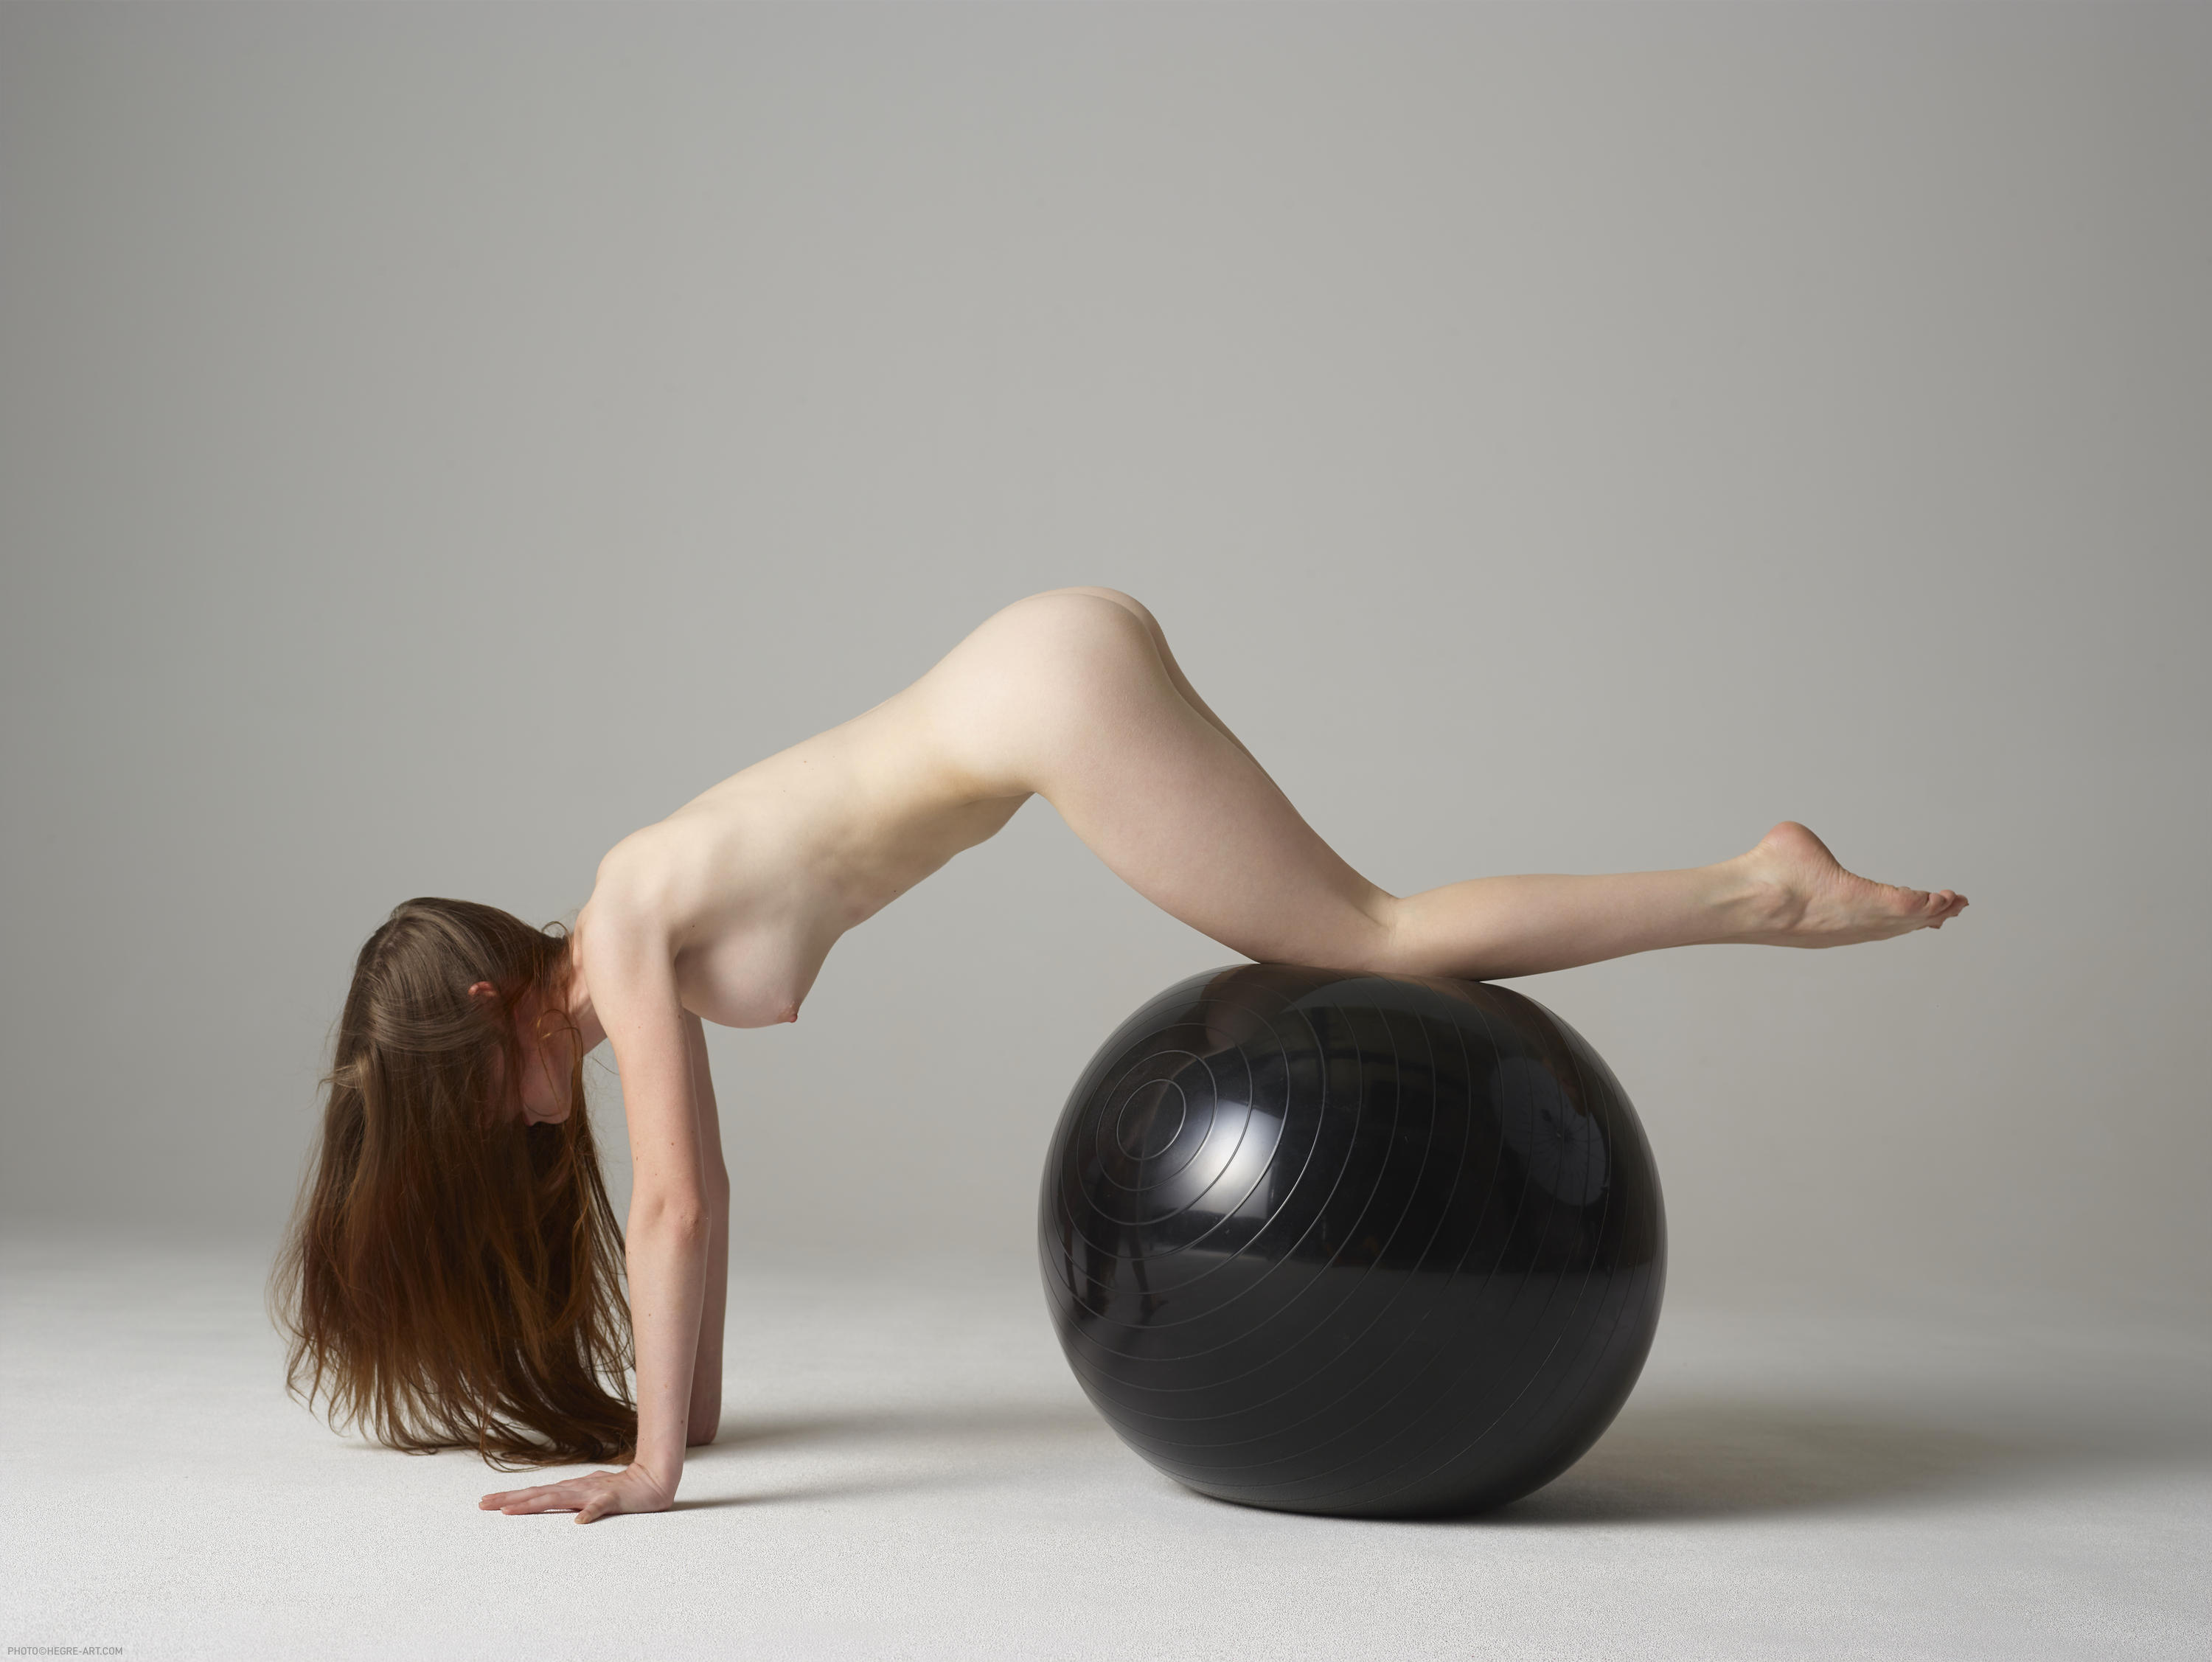 brunette, nude, boobs, exercise, ball, pose